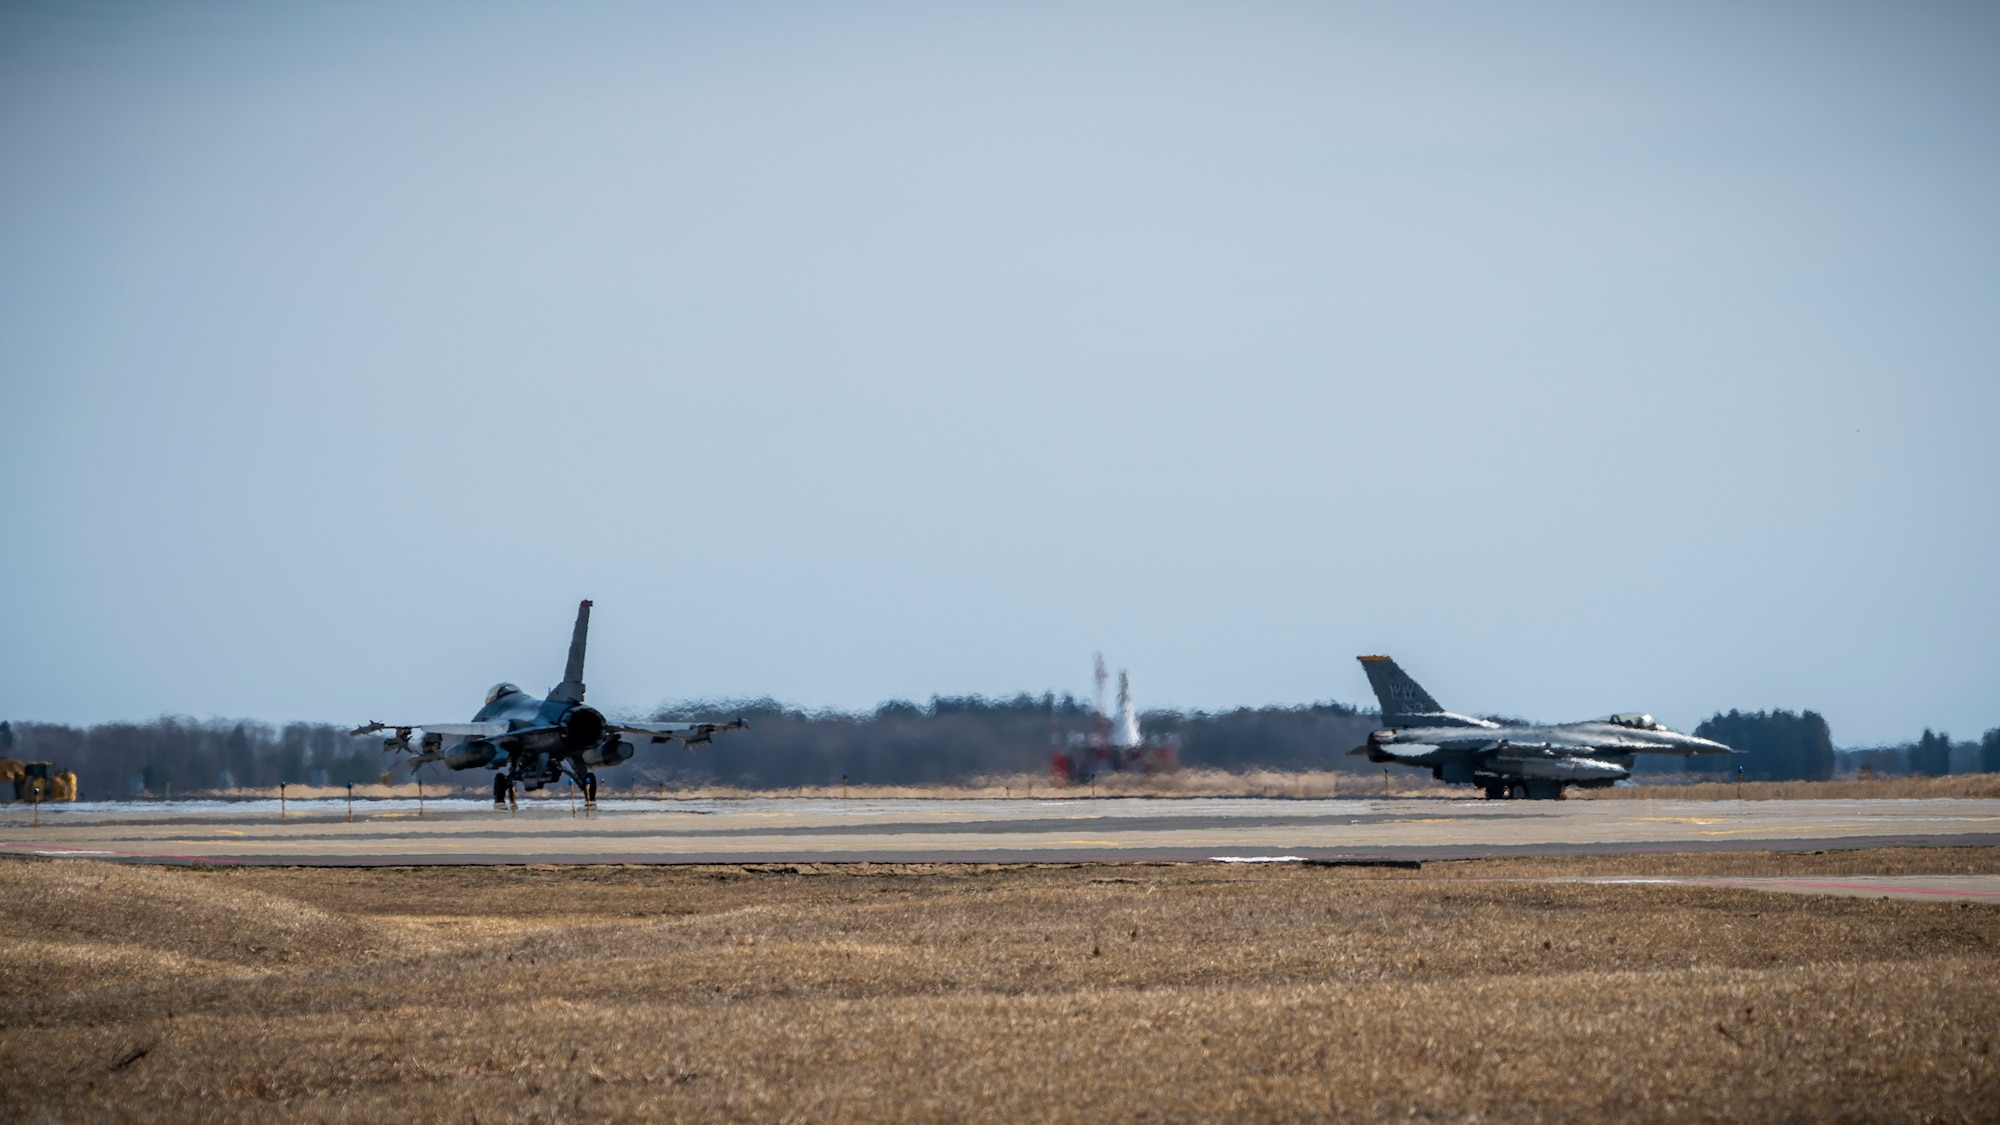 Two U.S. Air Force F-16 Fighting Falcons taxi down the runway at Misawa Air Base, Japan, March 30, 2020. During Operation Allied Force, U.S. Air Force F-16 Fighting Falcon fighters flew a variety of missions, including the suppression of enemy air defense, offensive counter air, defensive counter air, close air support and forward air controller missions. (U.S. Air Force photo by Airman 1st Class China M. Shock)